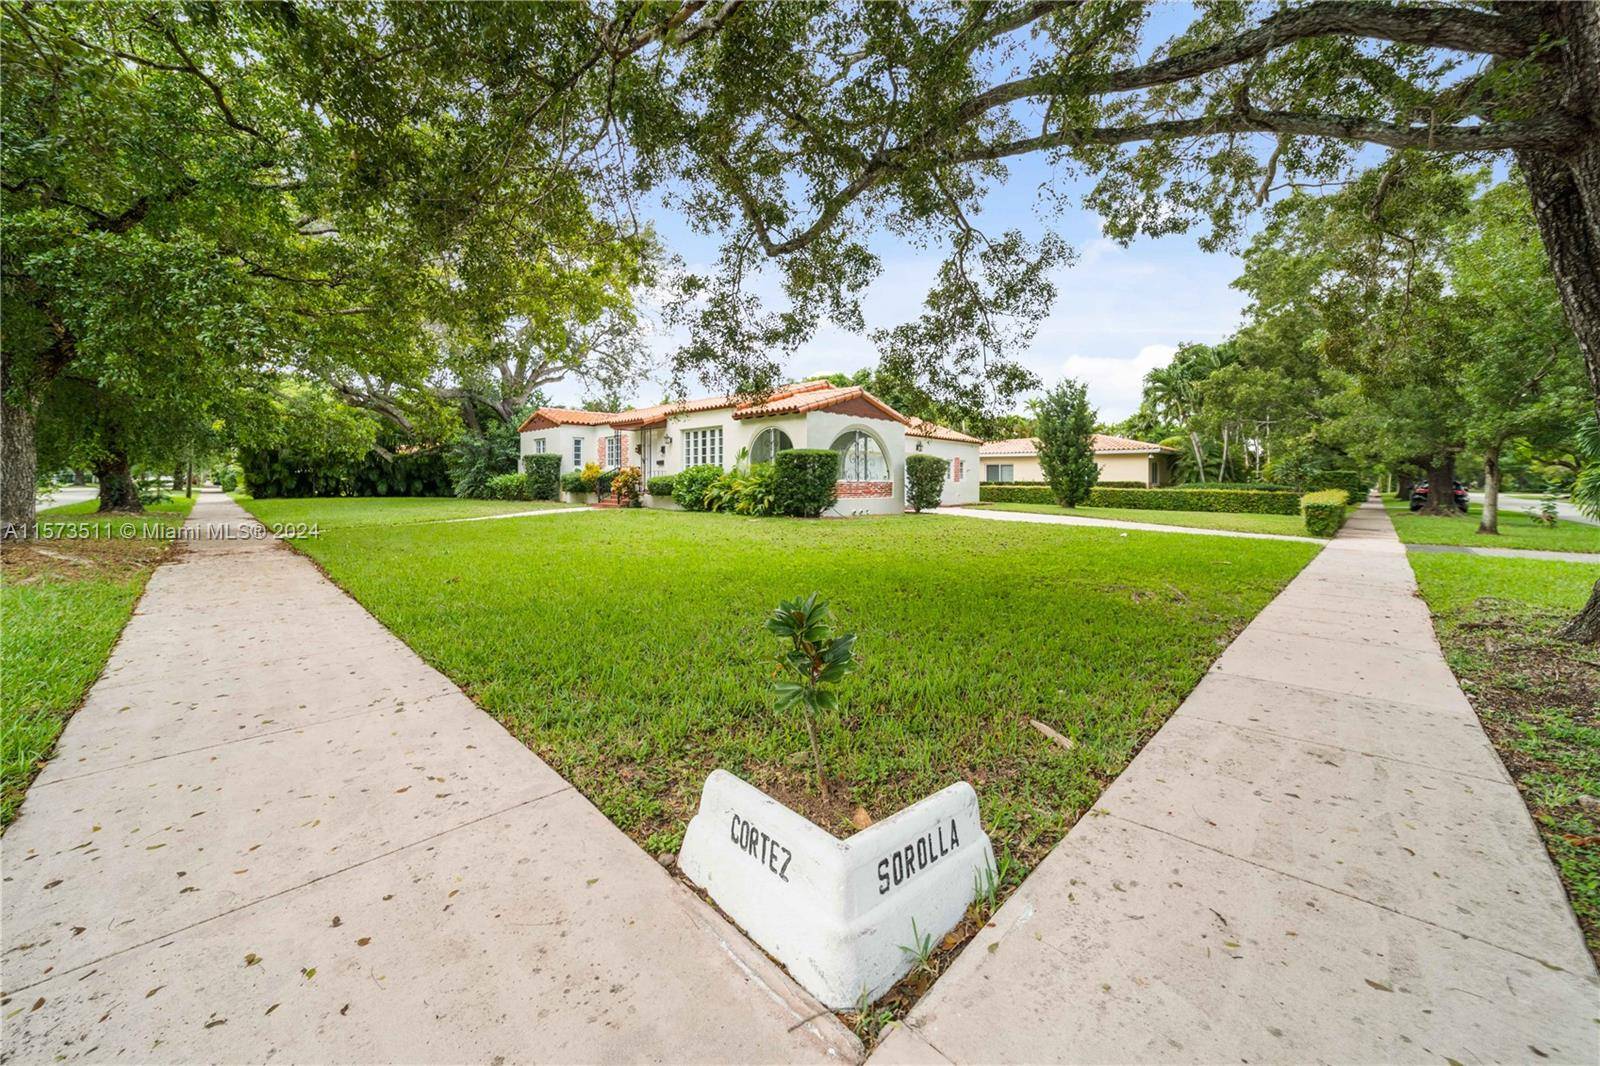 Beautiful Home in the heart of Coral Gables in a huge doble lot surrounded by mature trees, recently painted.